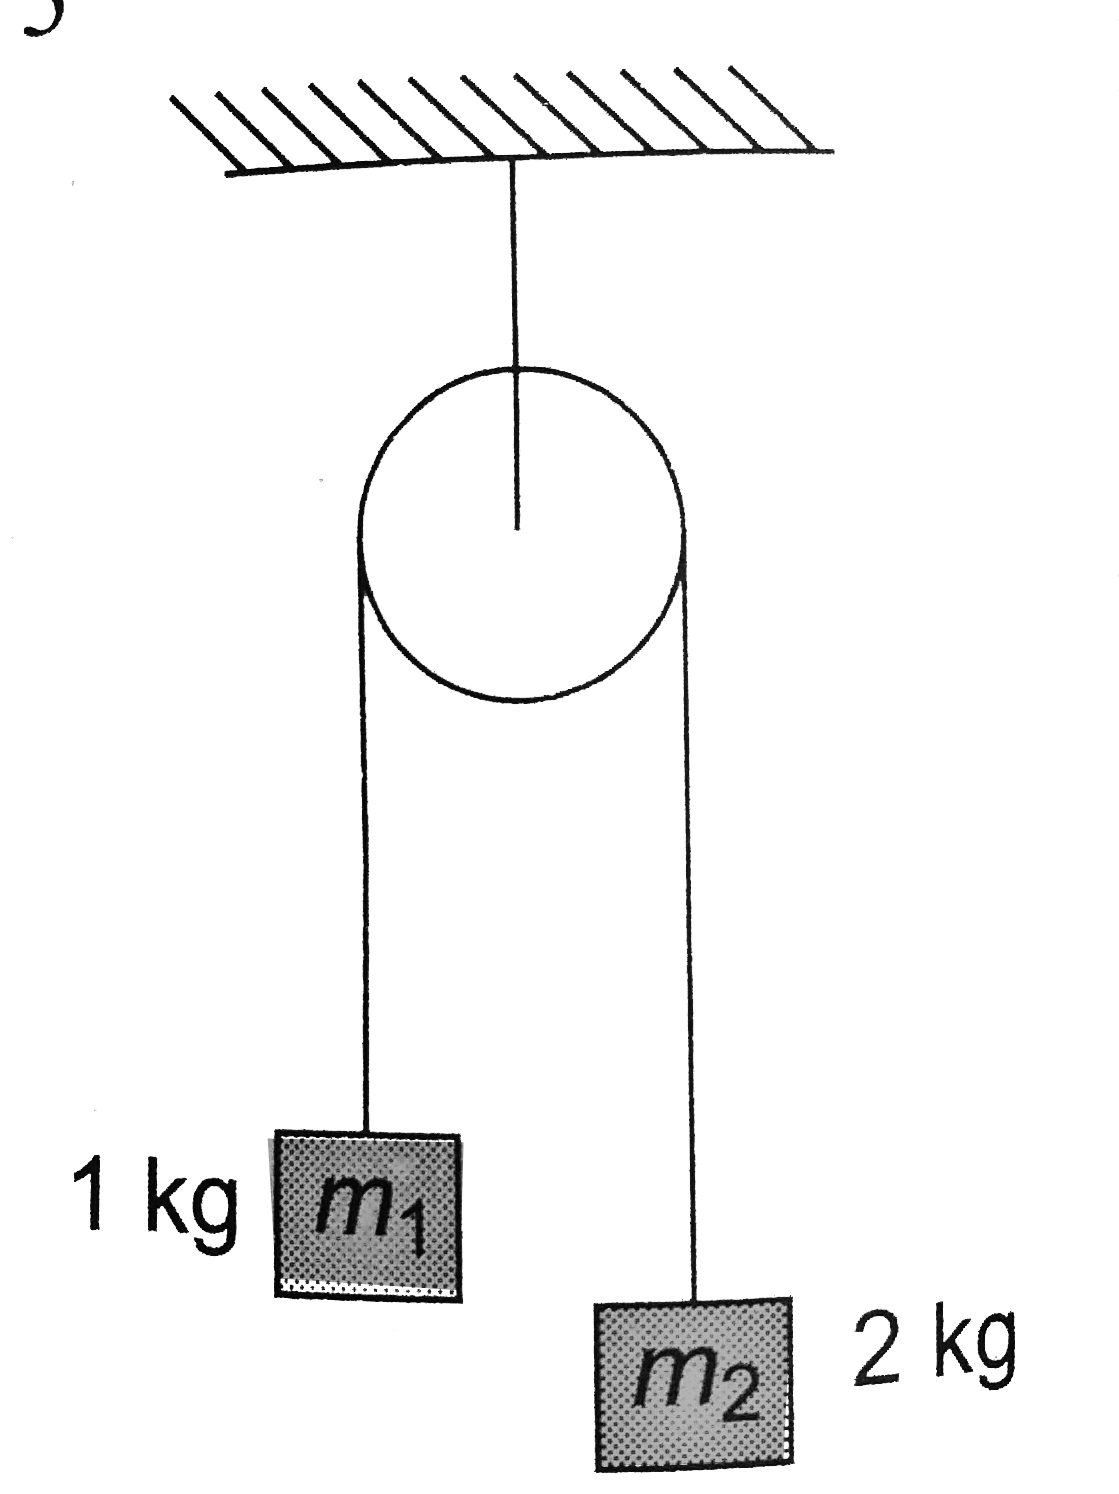 Two masses m1 = 1 kg and m2 = 2 kg are connected by a light inextensible string and suspended by means of a weightness pulley as shown in the figure. Assuming that both the masses start from rest, the distance travelled by the centre of mass in two seconds is (Take g = 10 ms^-2).   .